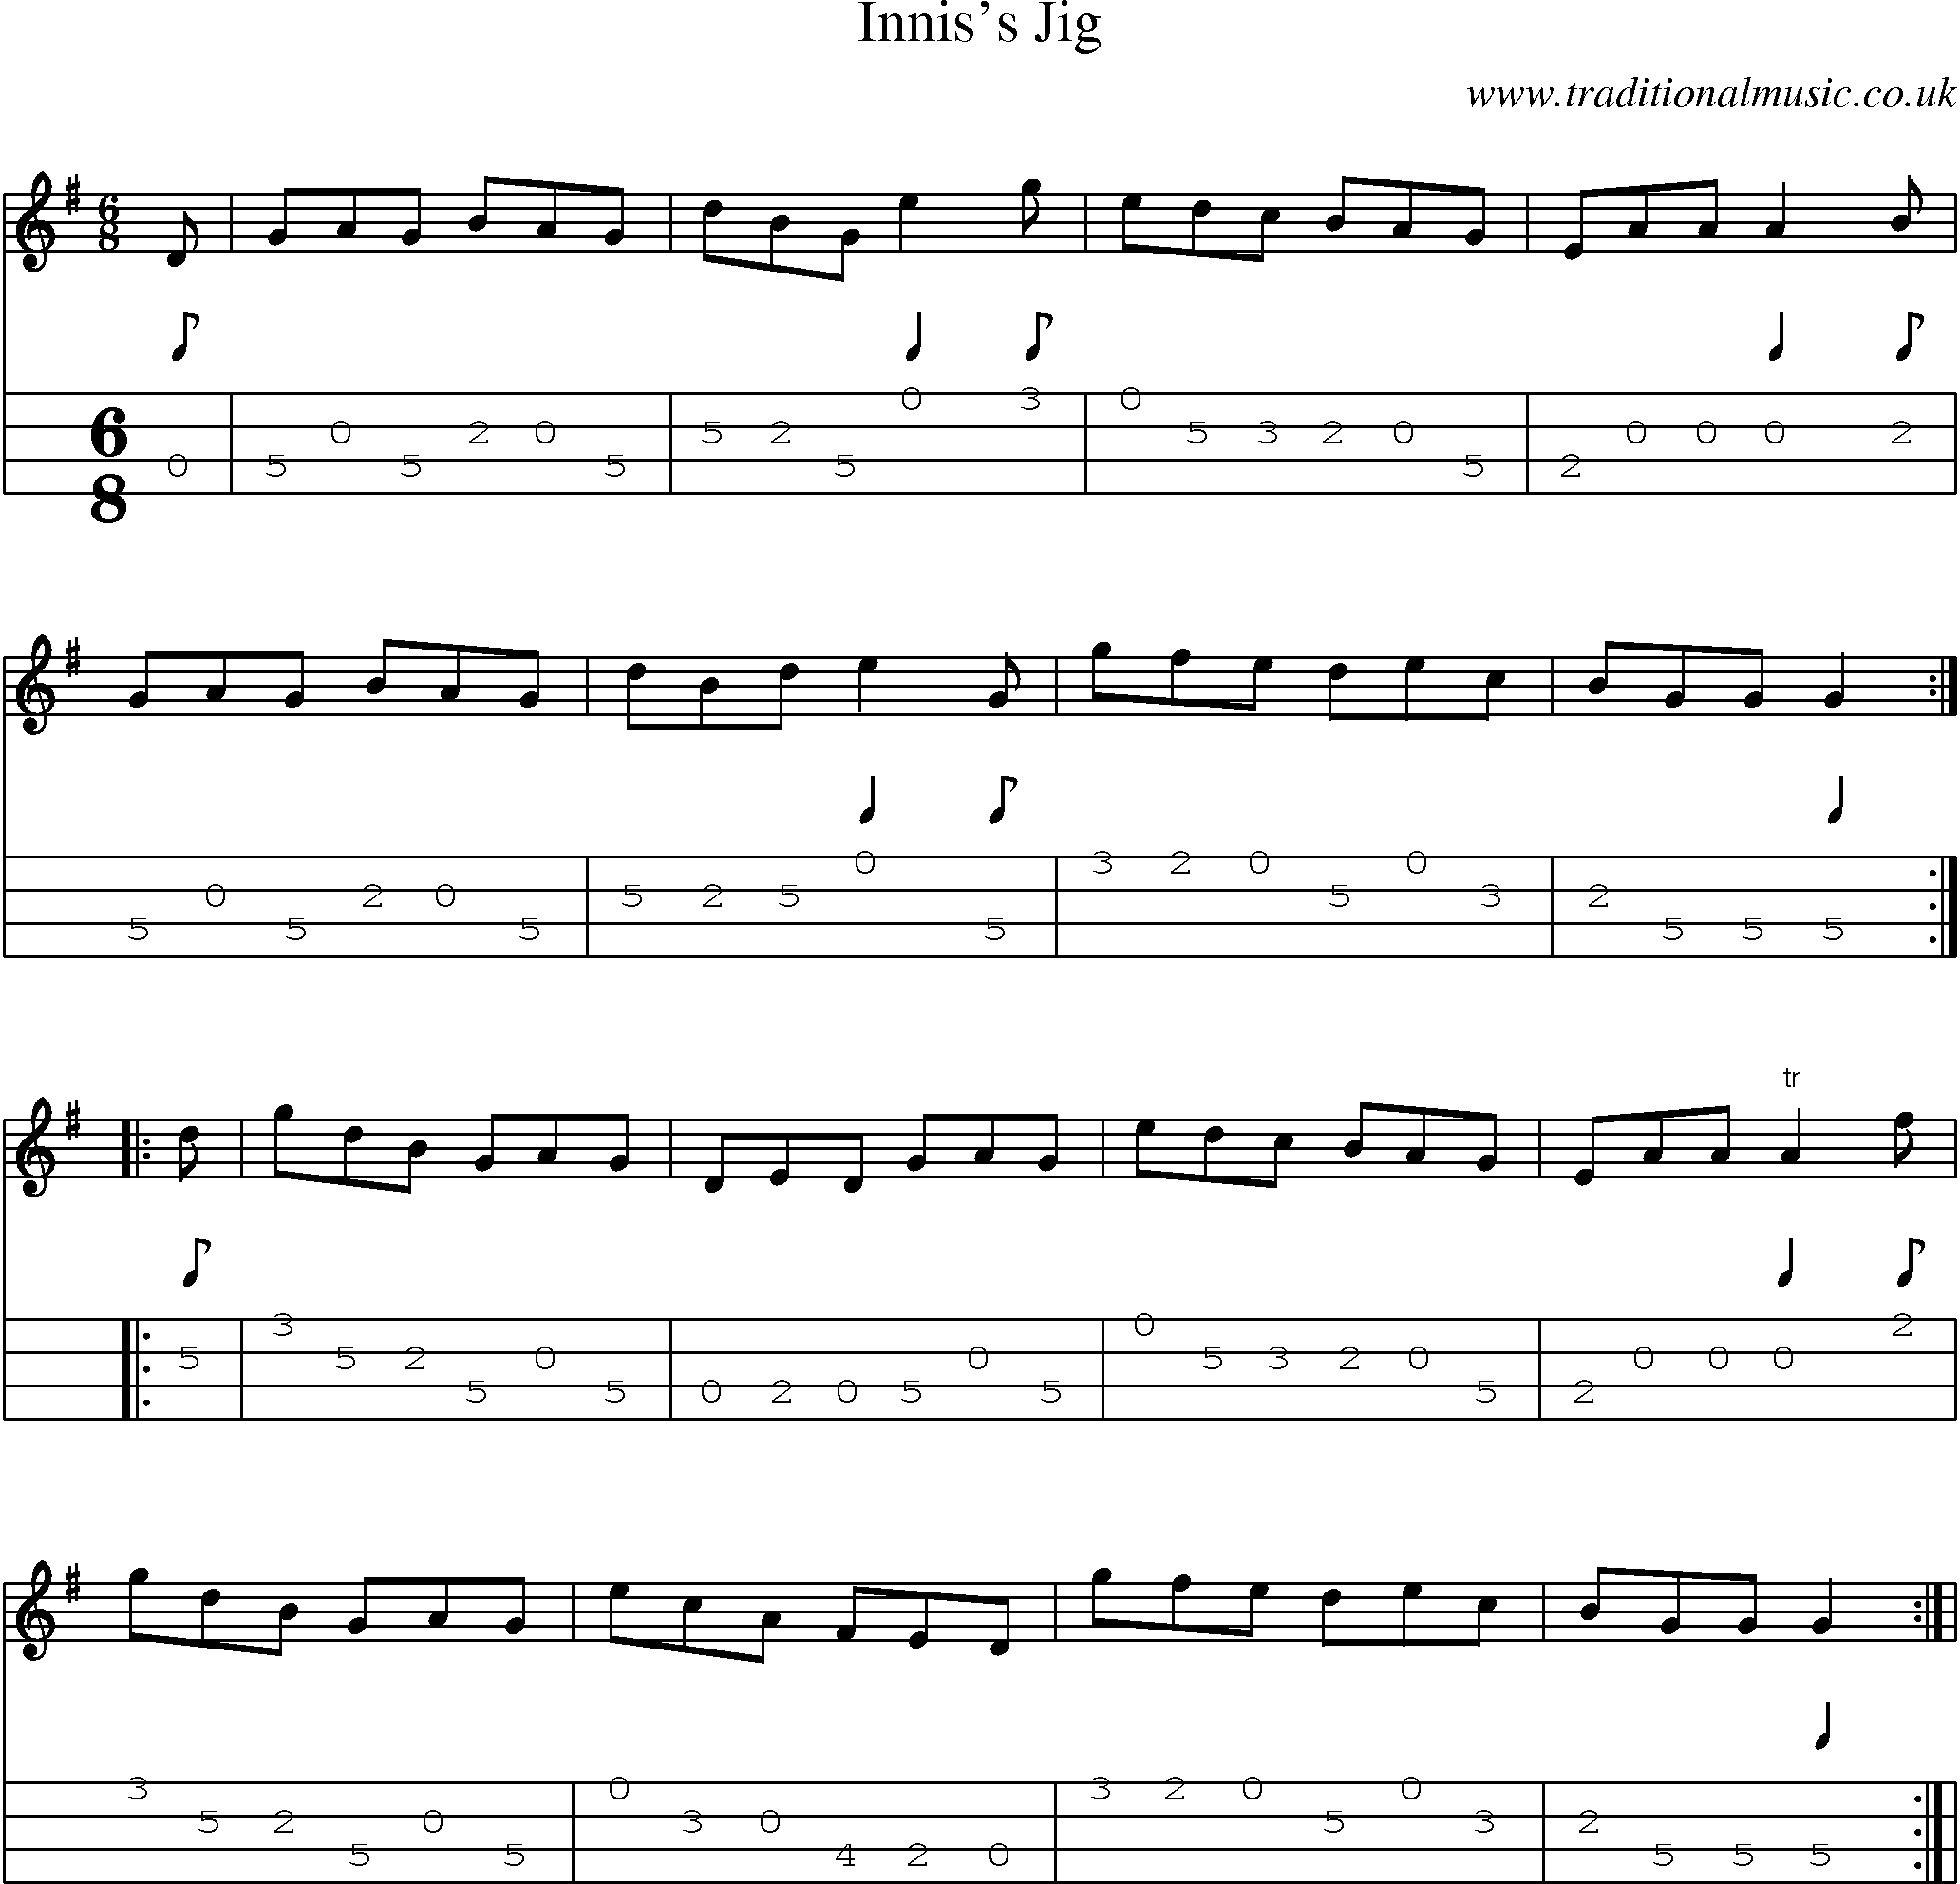 Music Score and Mandolin Tabs for Inniss Jig